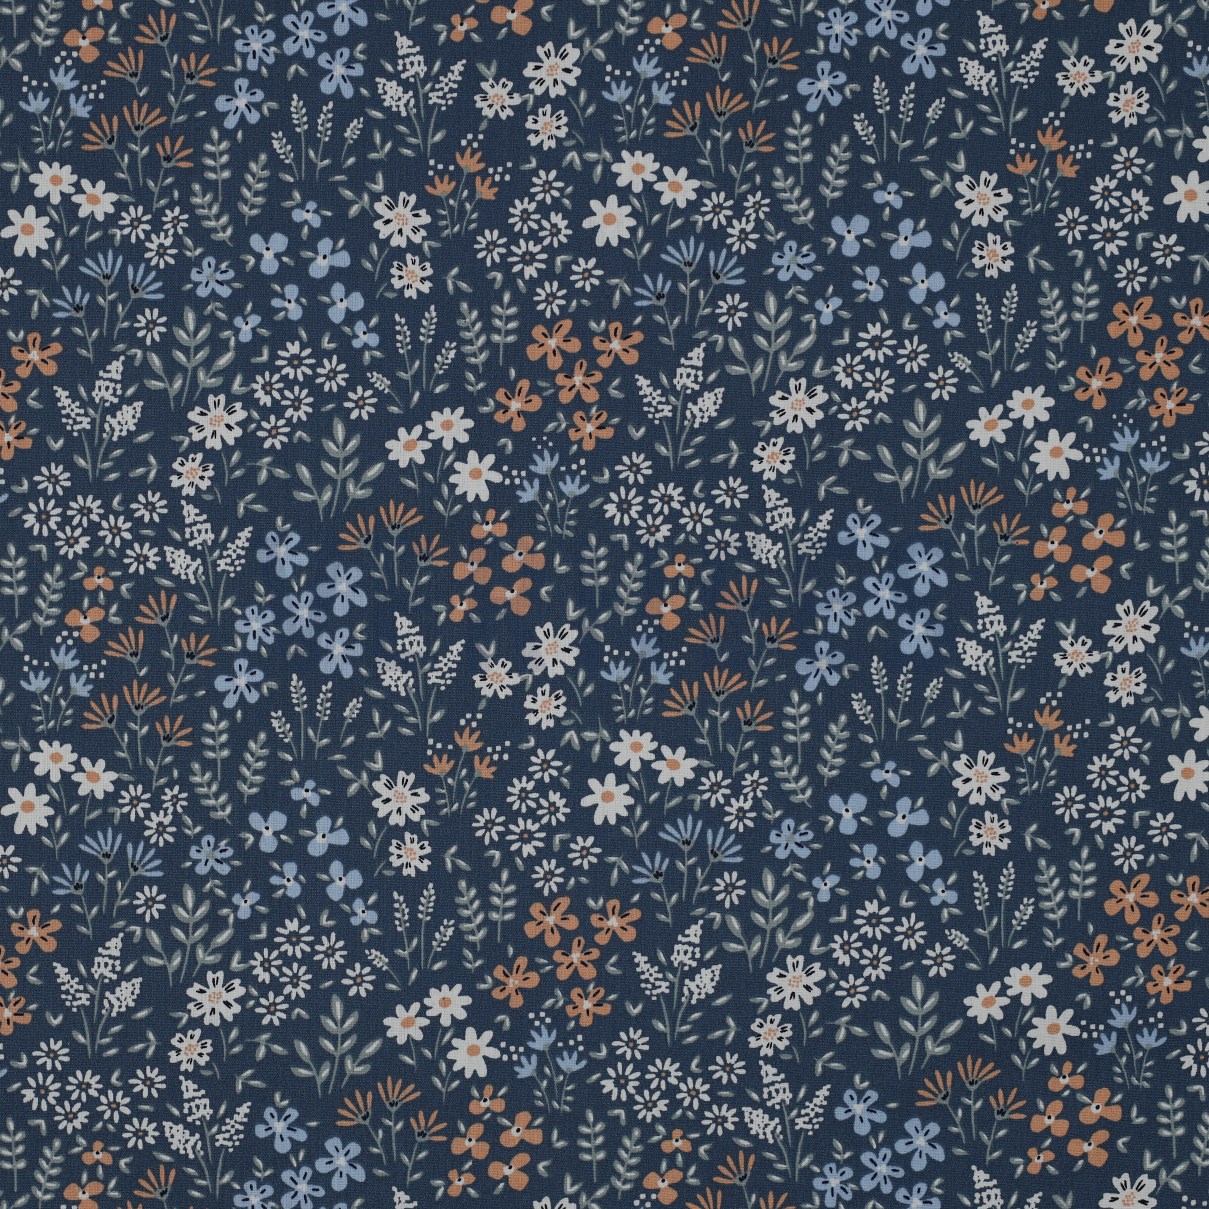 COATED COTTON FLOWERS JEANS (high resolution)